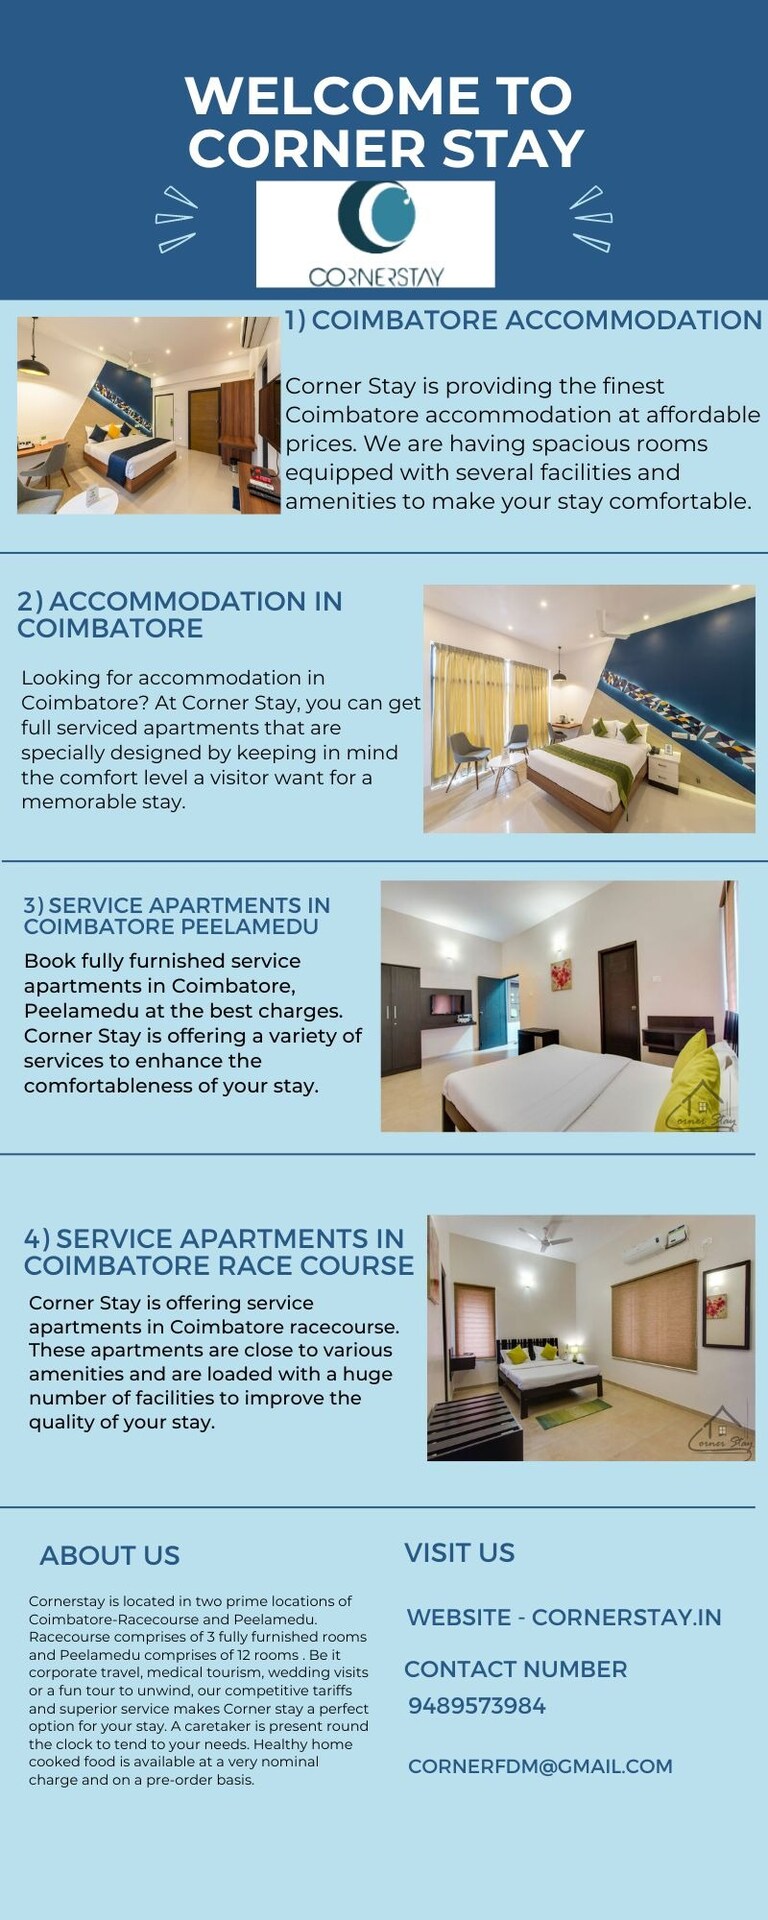 Service Apartments in Coimbatore Peelamedu Book fully furnished service apartments in Coimbatore, Peelamedu at the best charges. Corner Stay is offering a